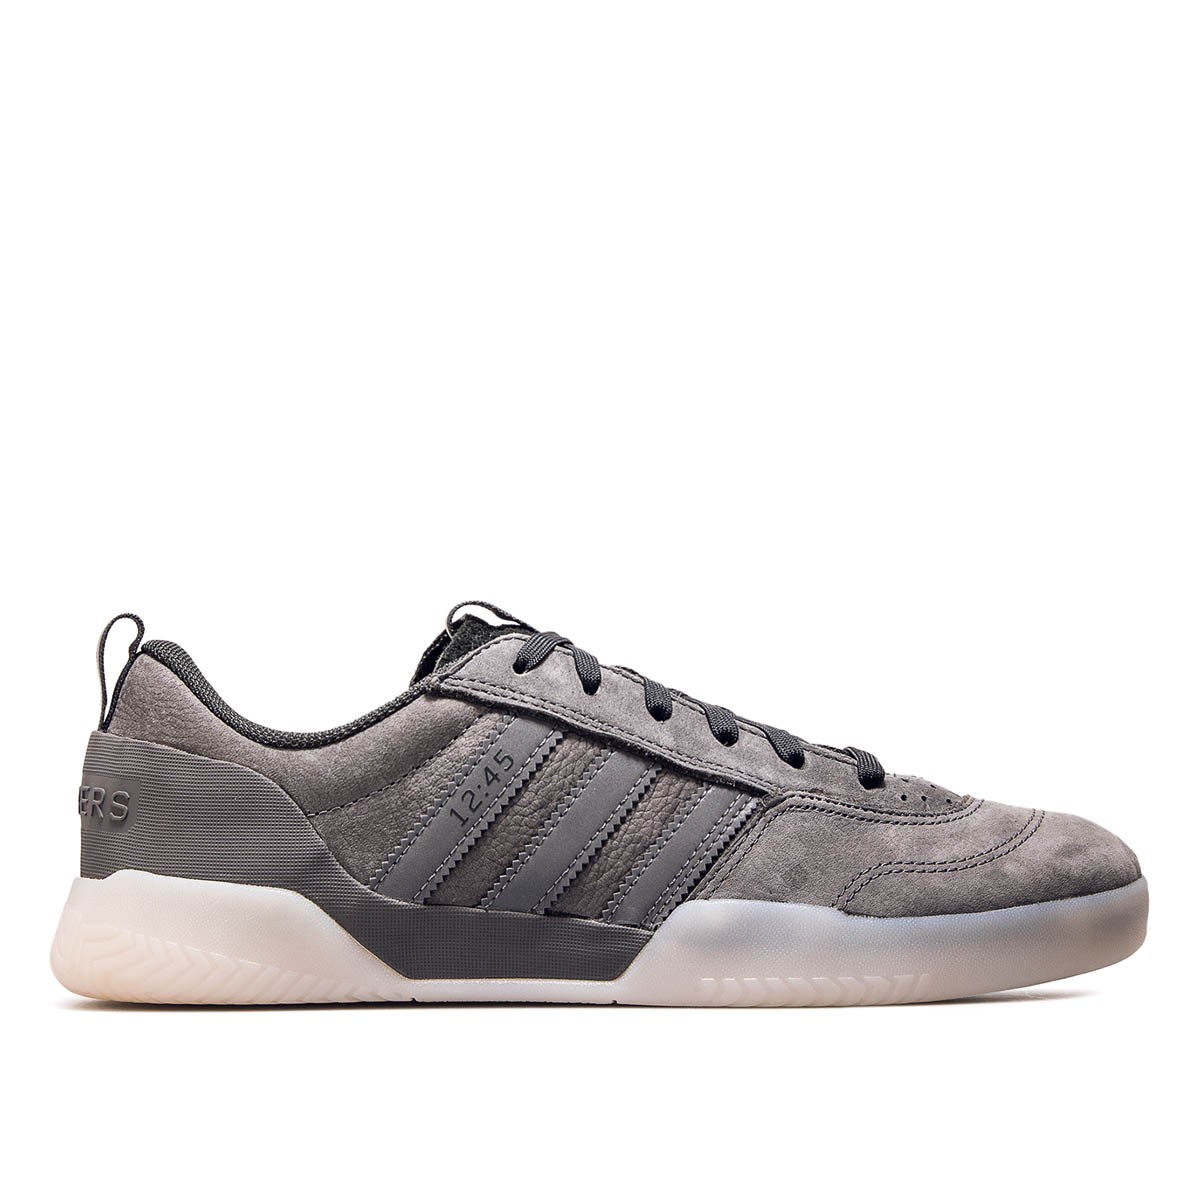 Adidas Skate City Cup X Numbers Grey